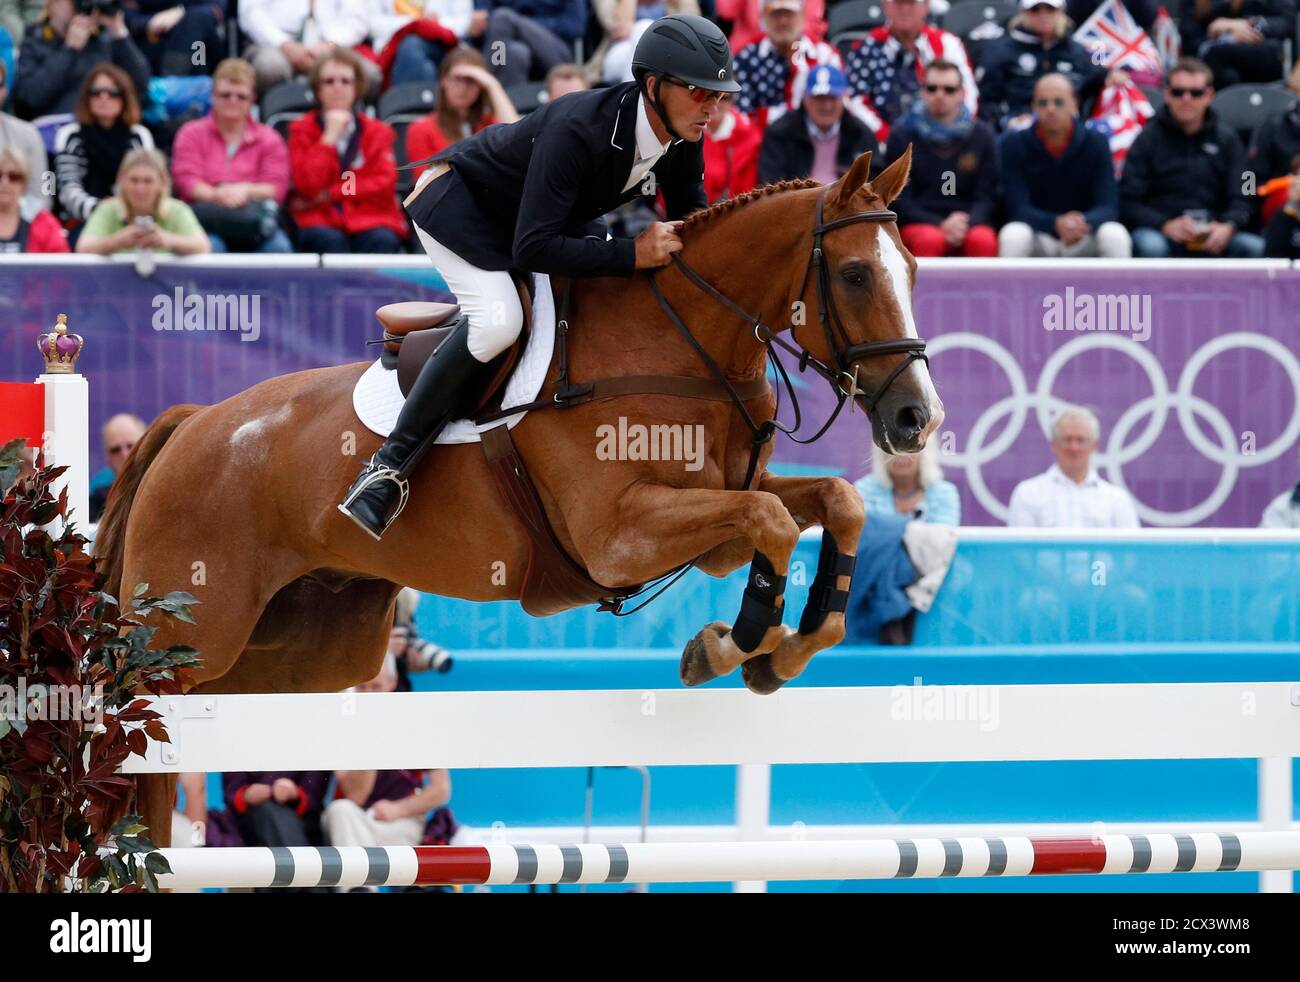 New Zealand's Andrew Nicholson, riding Nereo, clears a fence during the Eventing Jumping equestrian event at the London 2012 Olympic Games in Greenwich Park, July 31, 2012.    REUTERS/Mike Hutchings (BRITAIN  - Tags: SPORT OLYMPICS EQUESTRIANISM) Stock Photo